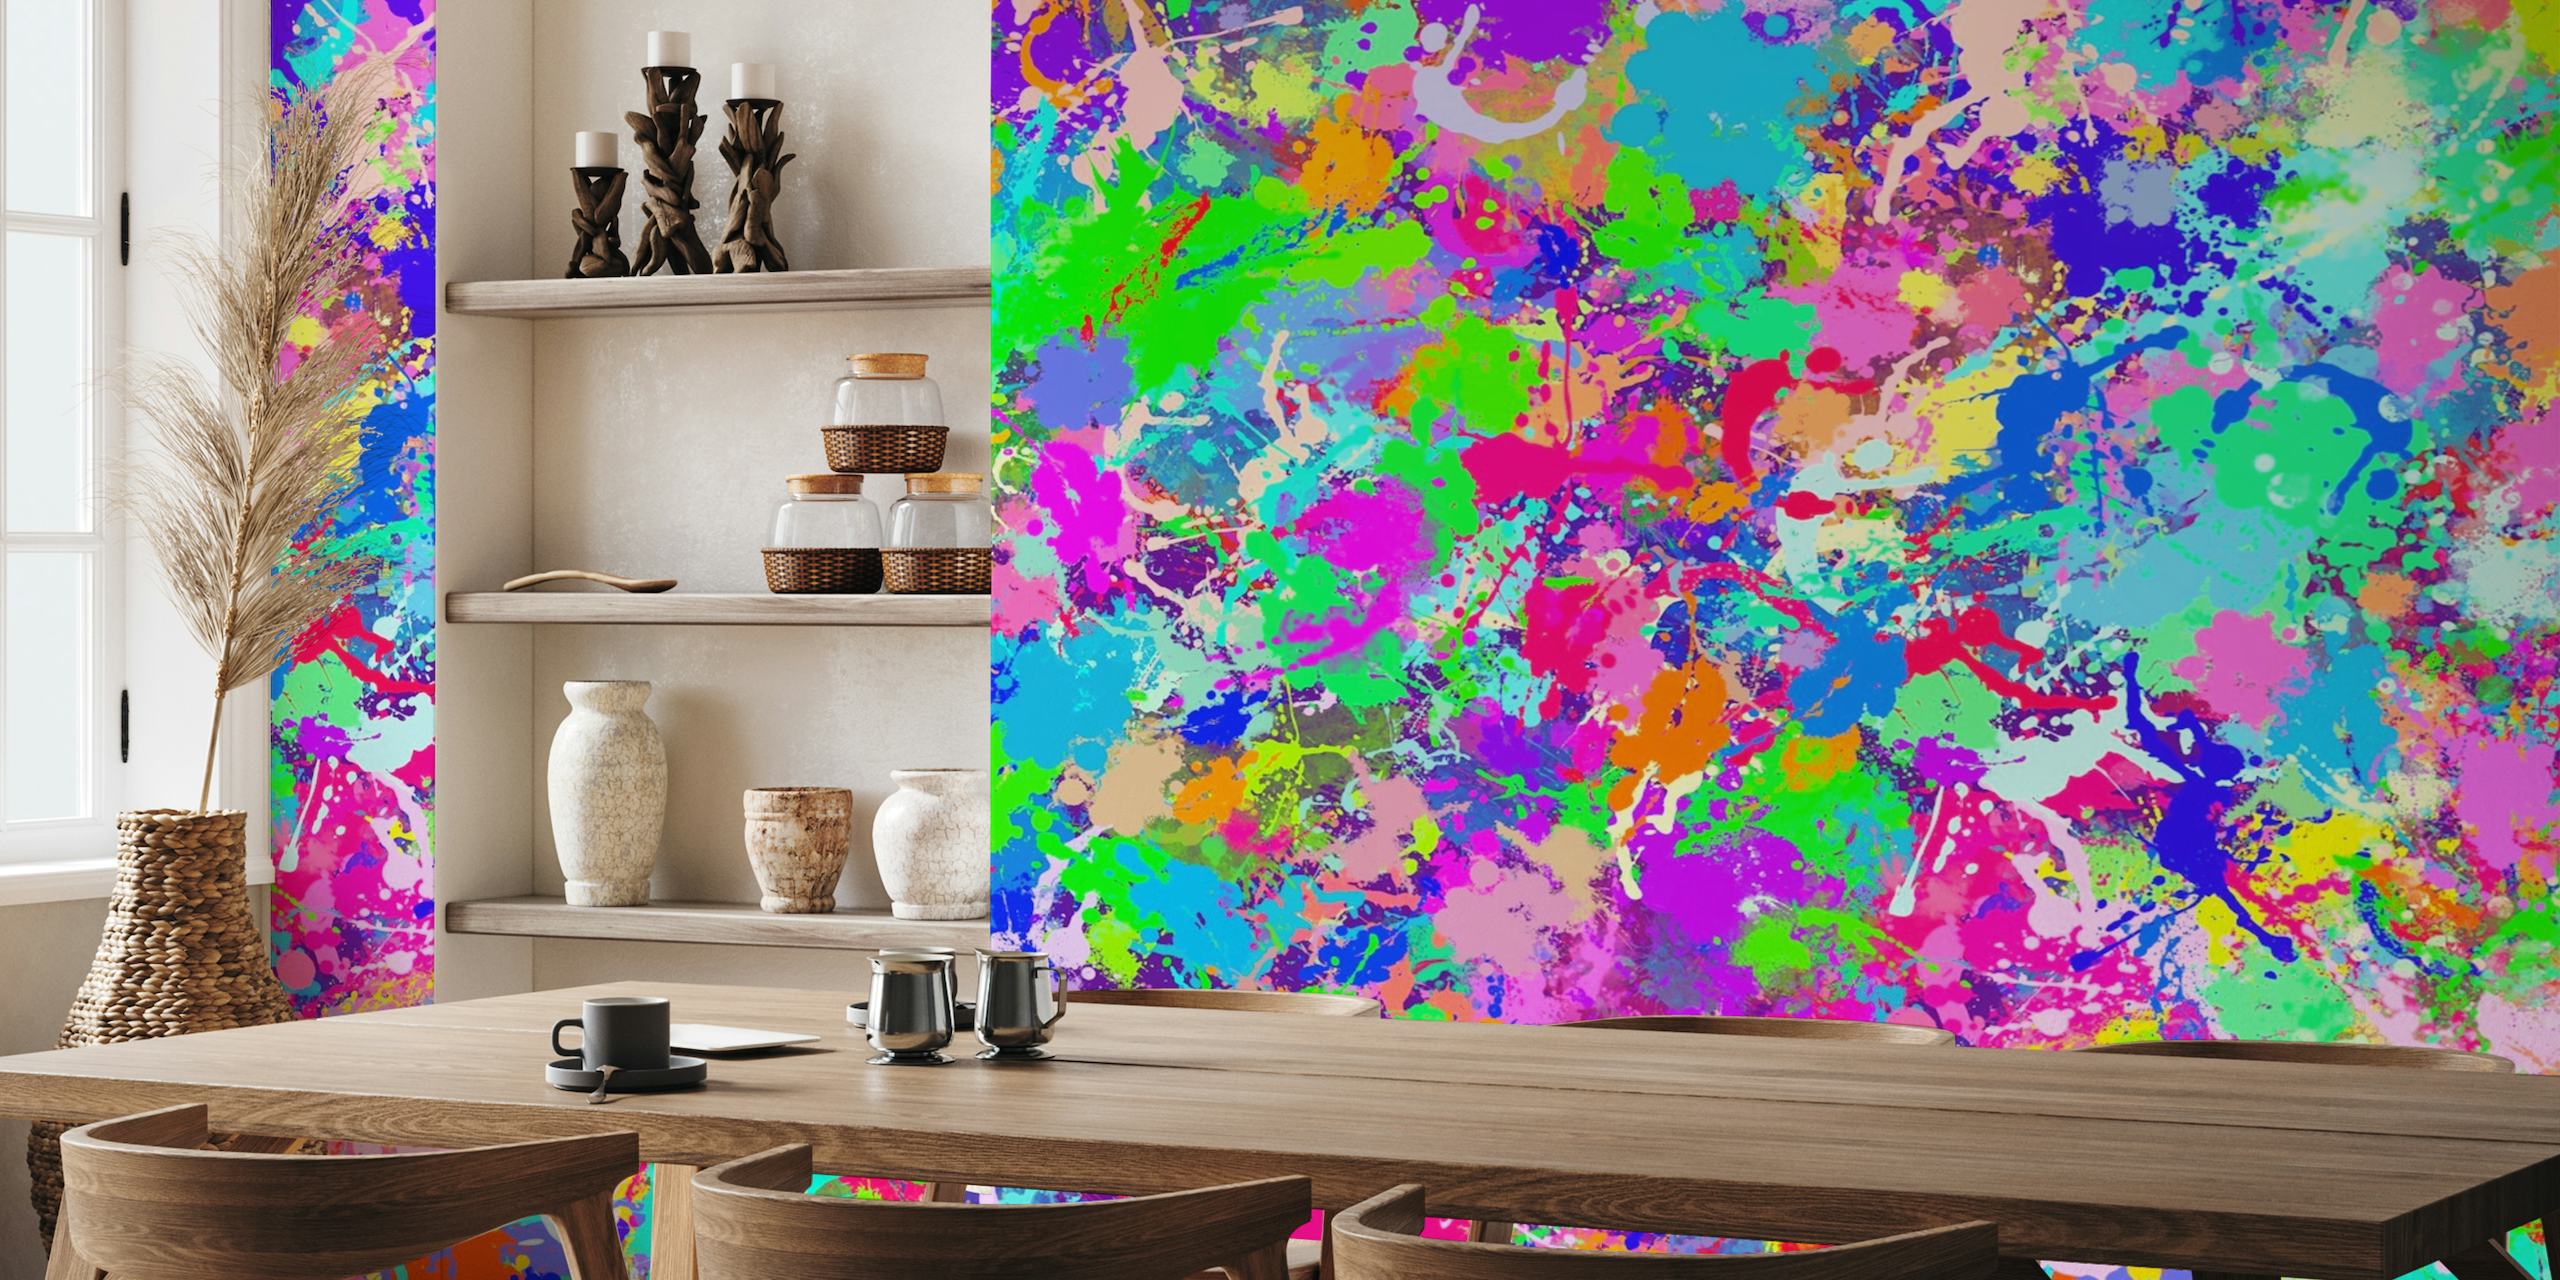 Colorful abstract paint splash wall mural with vibrant hues of pink, blue, green, and yellow